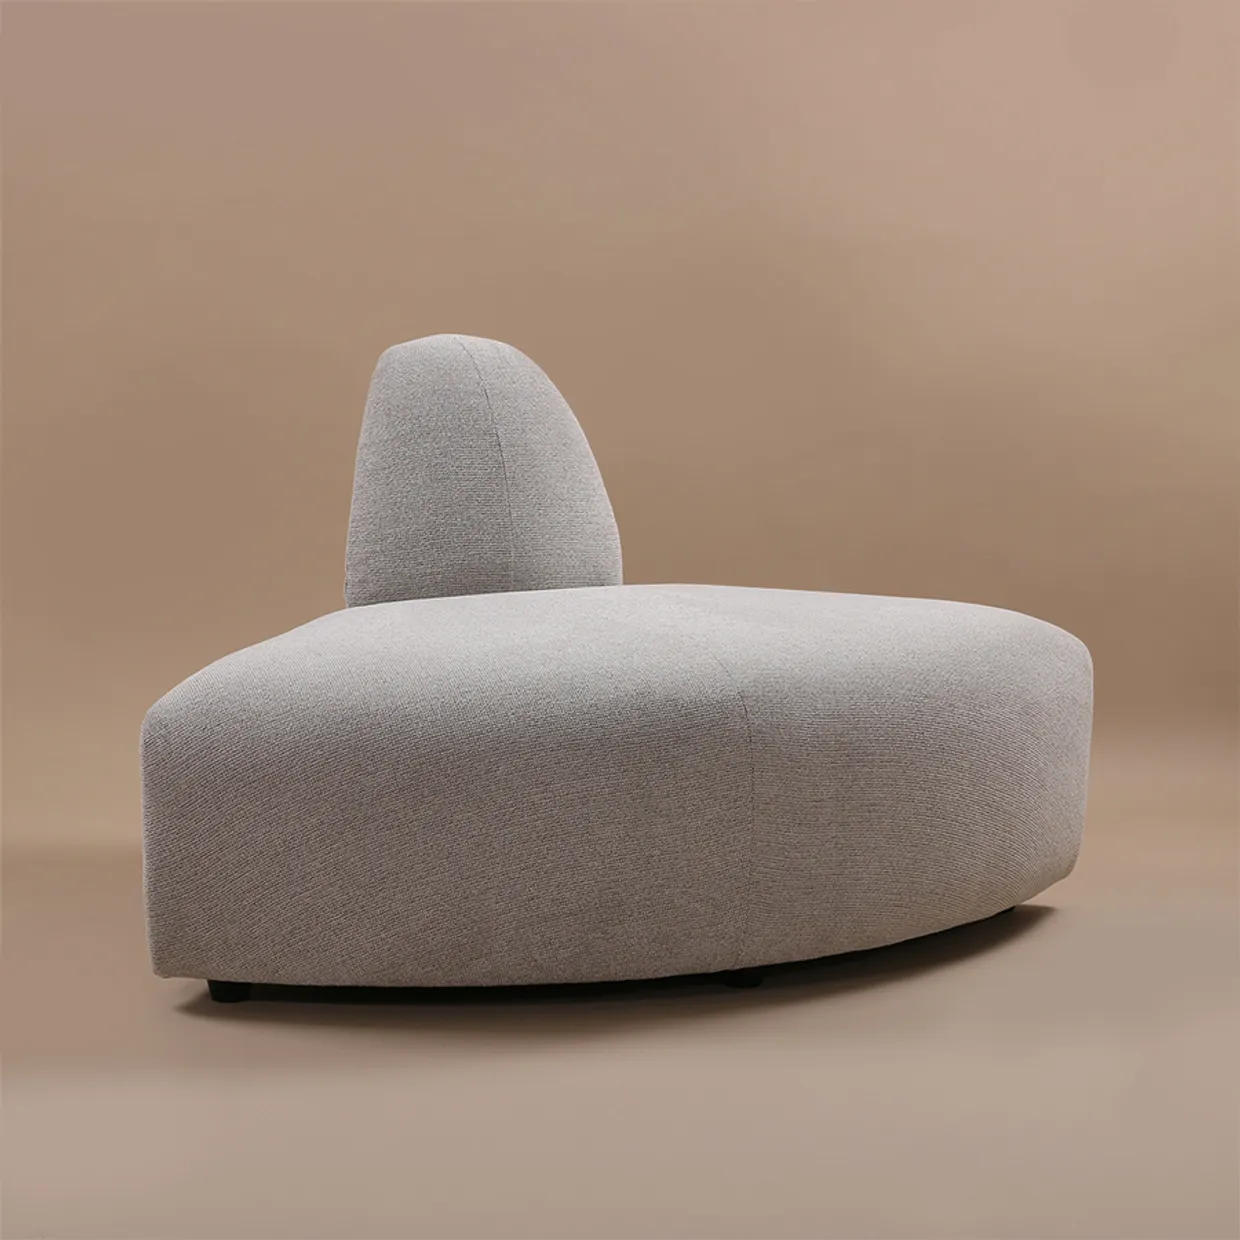 Jax couch: element angle, sneak, light grey